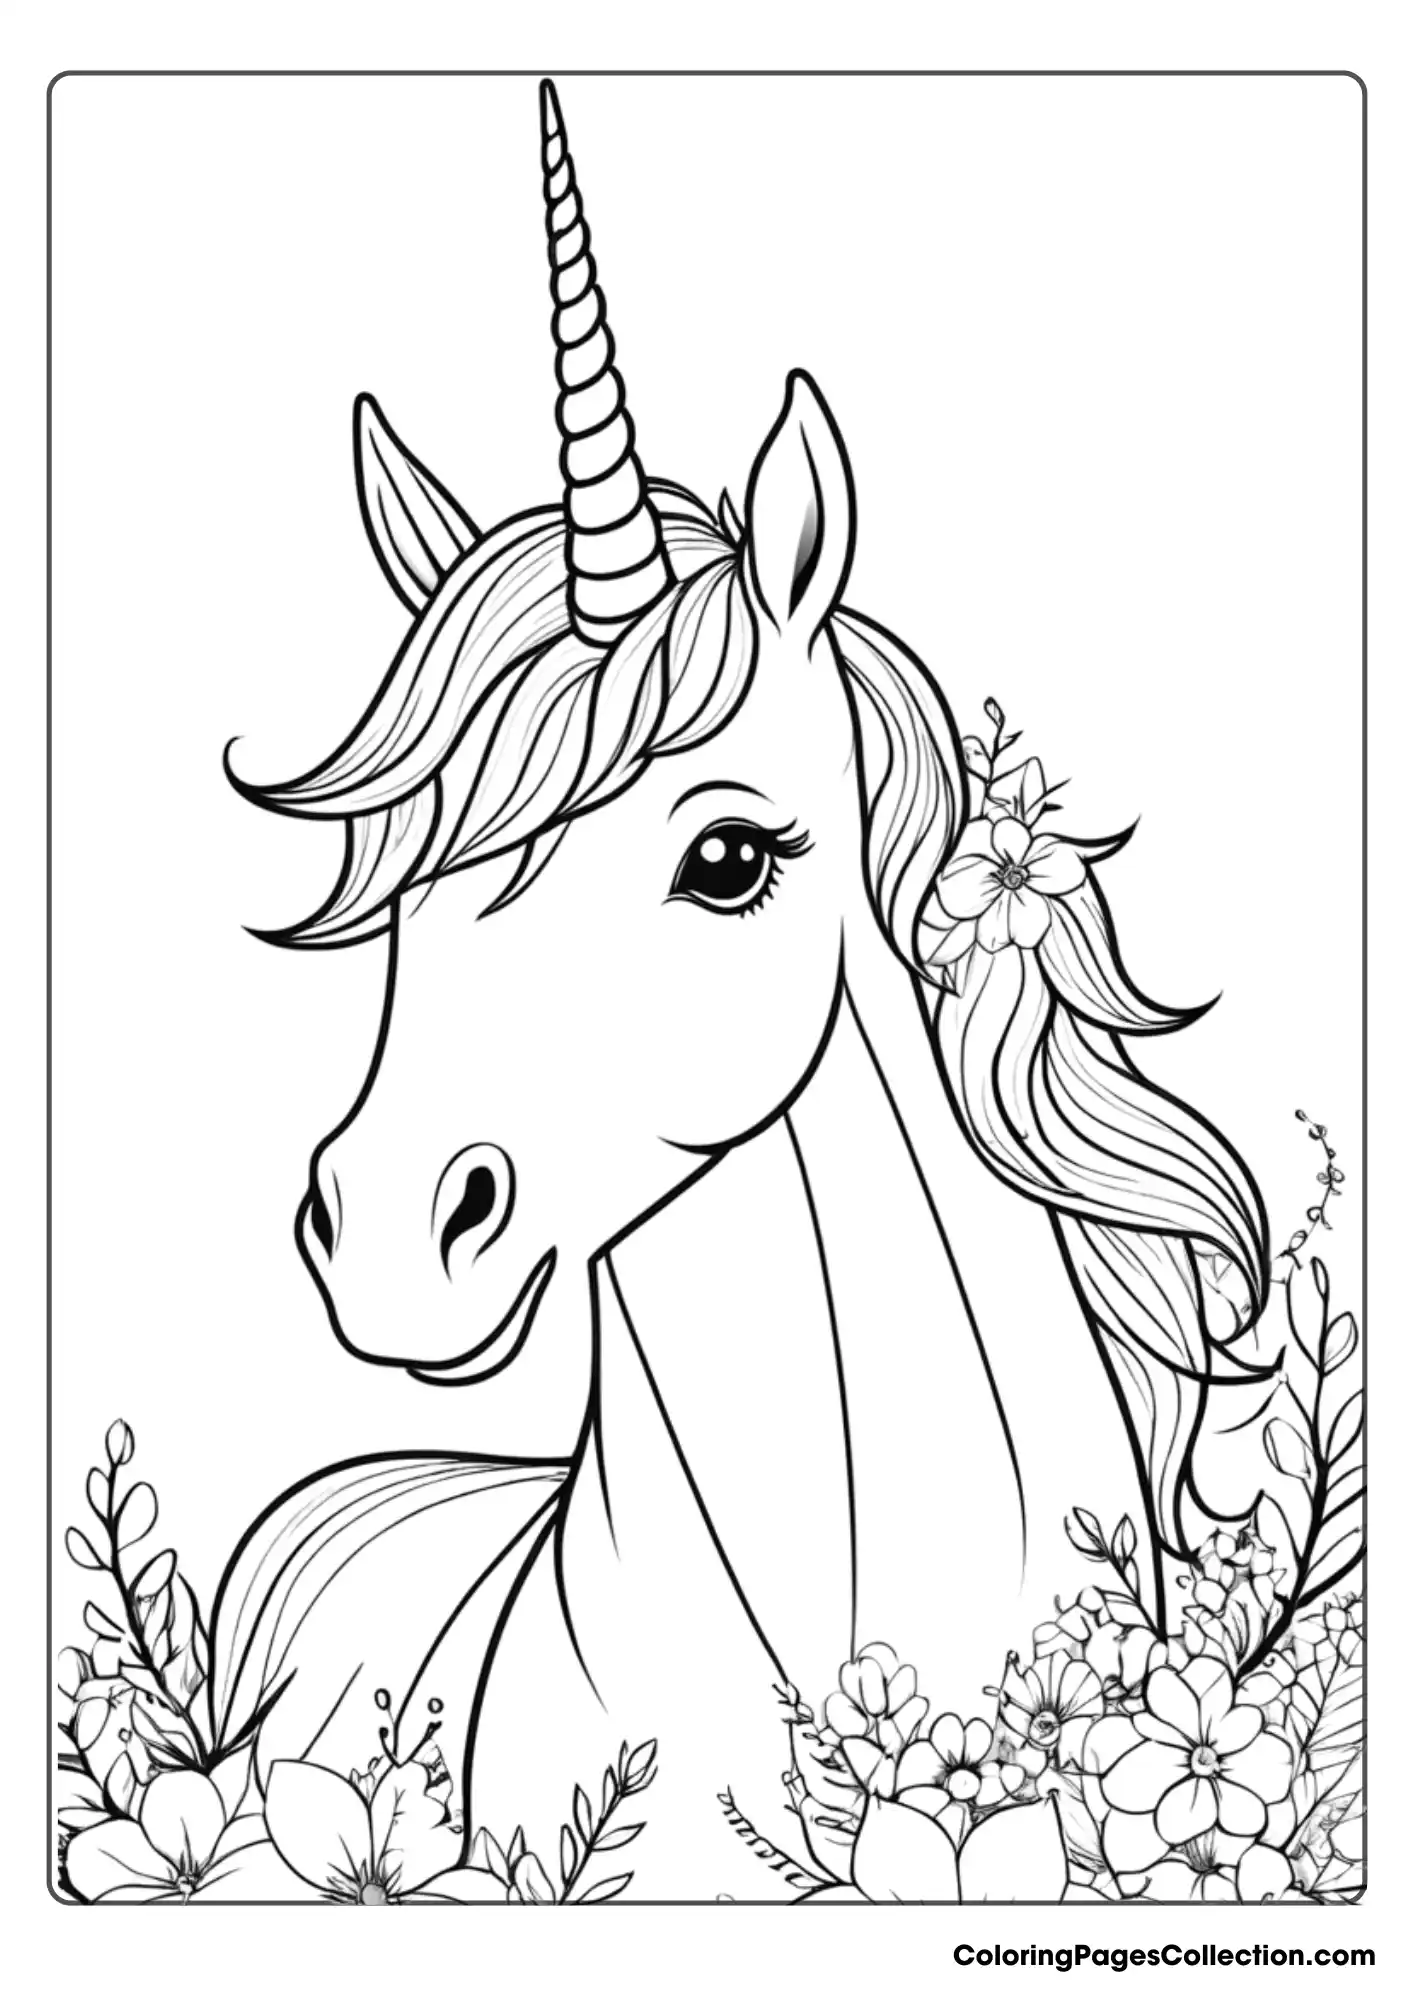 Coloring pages for teens, Unicorn with Floral Art